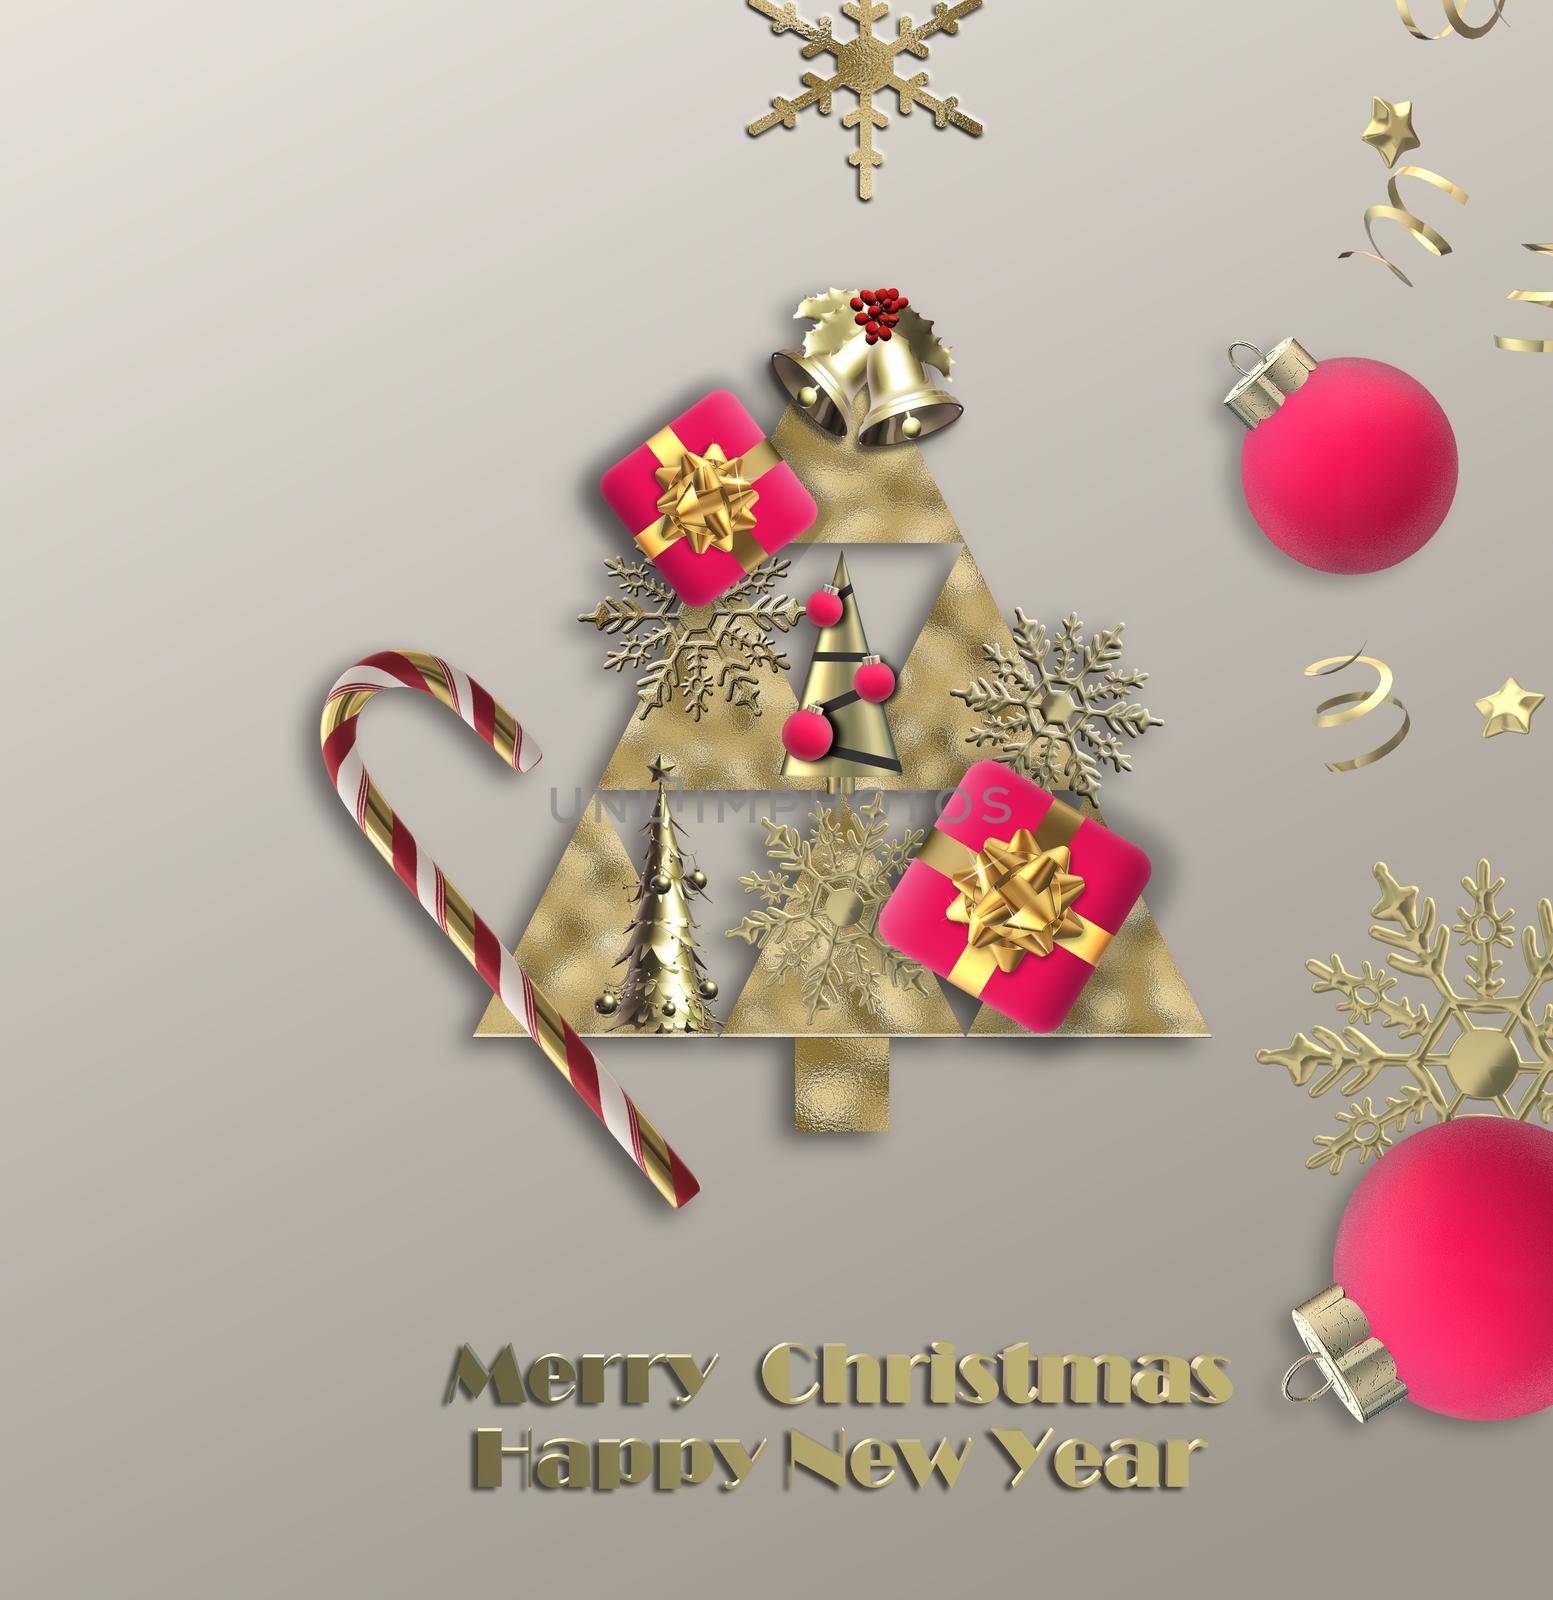 Merry Christmas New Year greeting card by NelliPolk